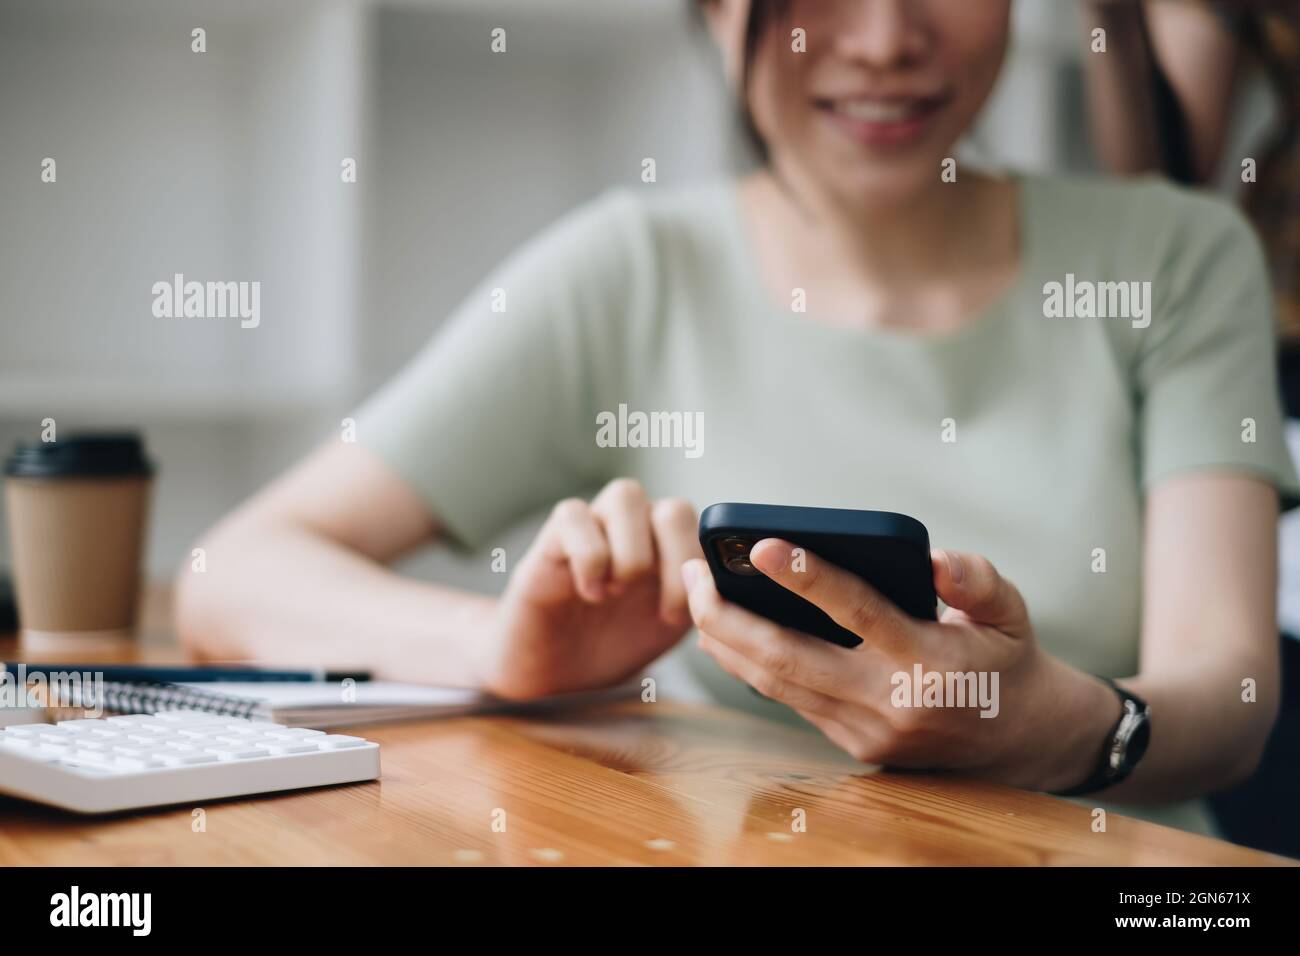 Woman scan her face for KYC security her saving bank account. Biometric data security concept. Stock Photo